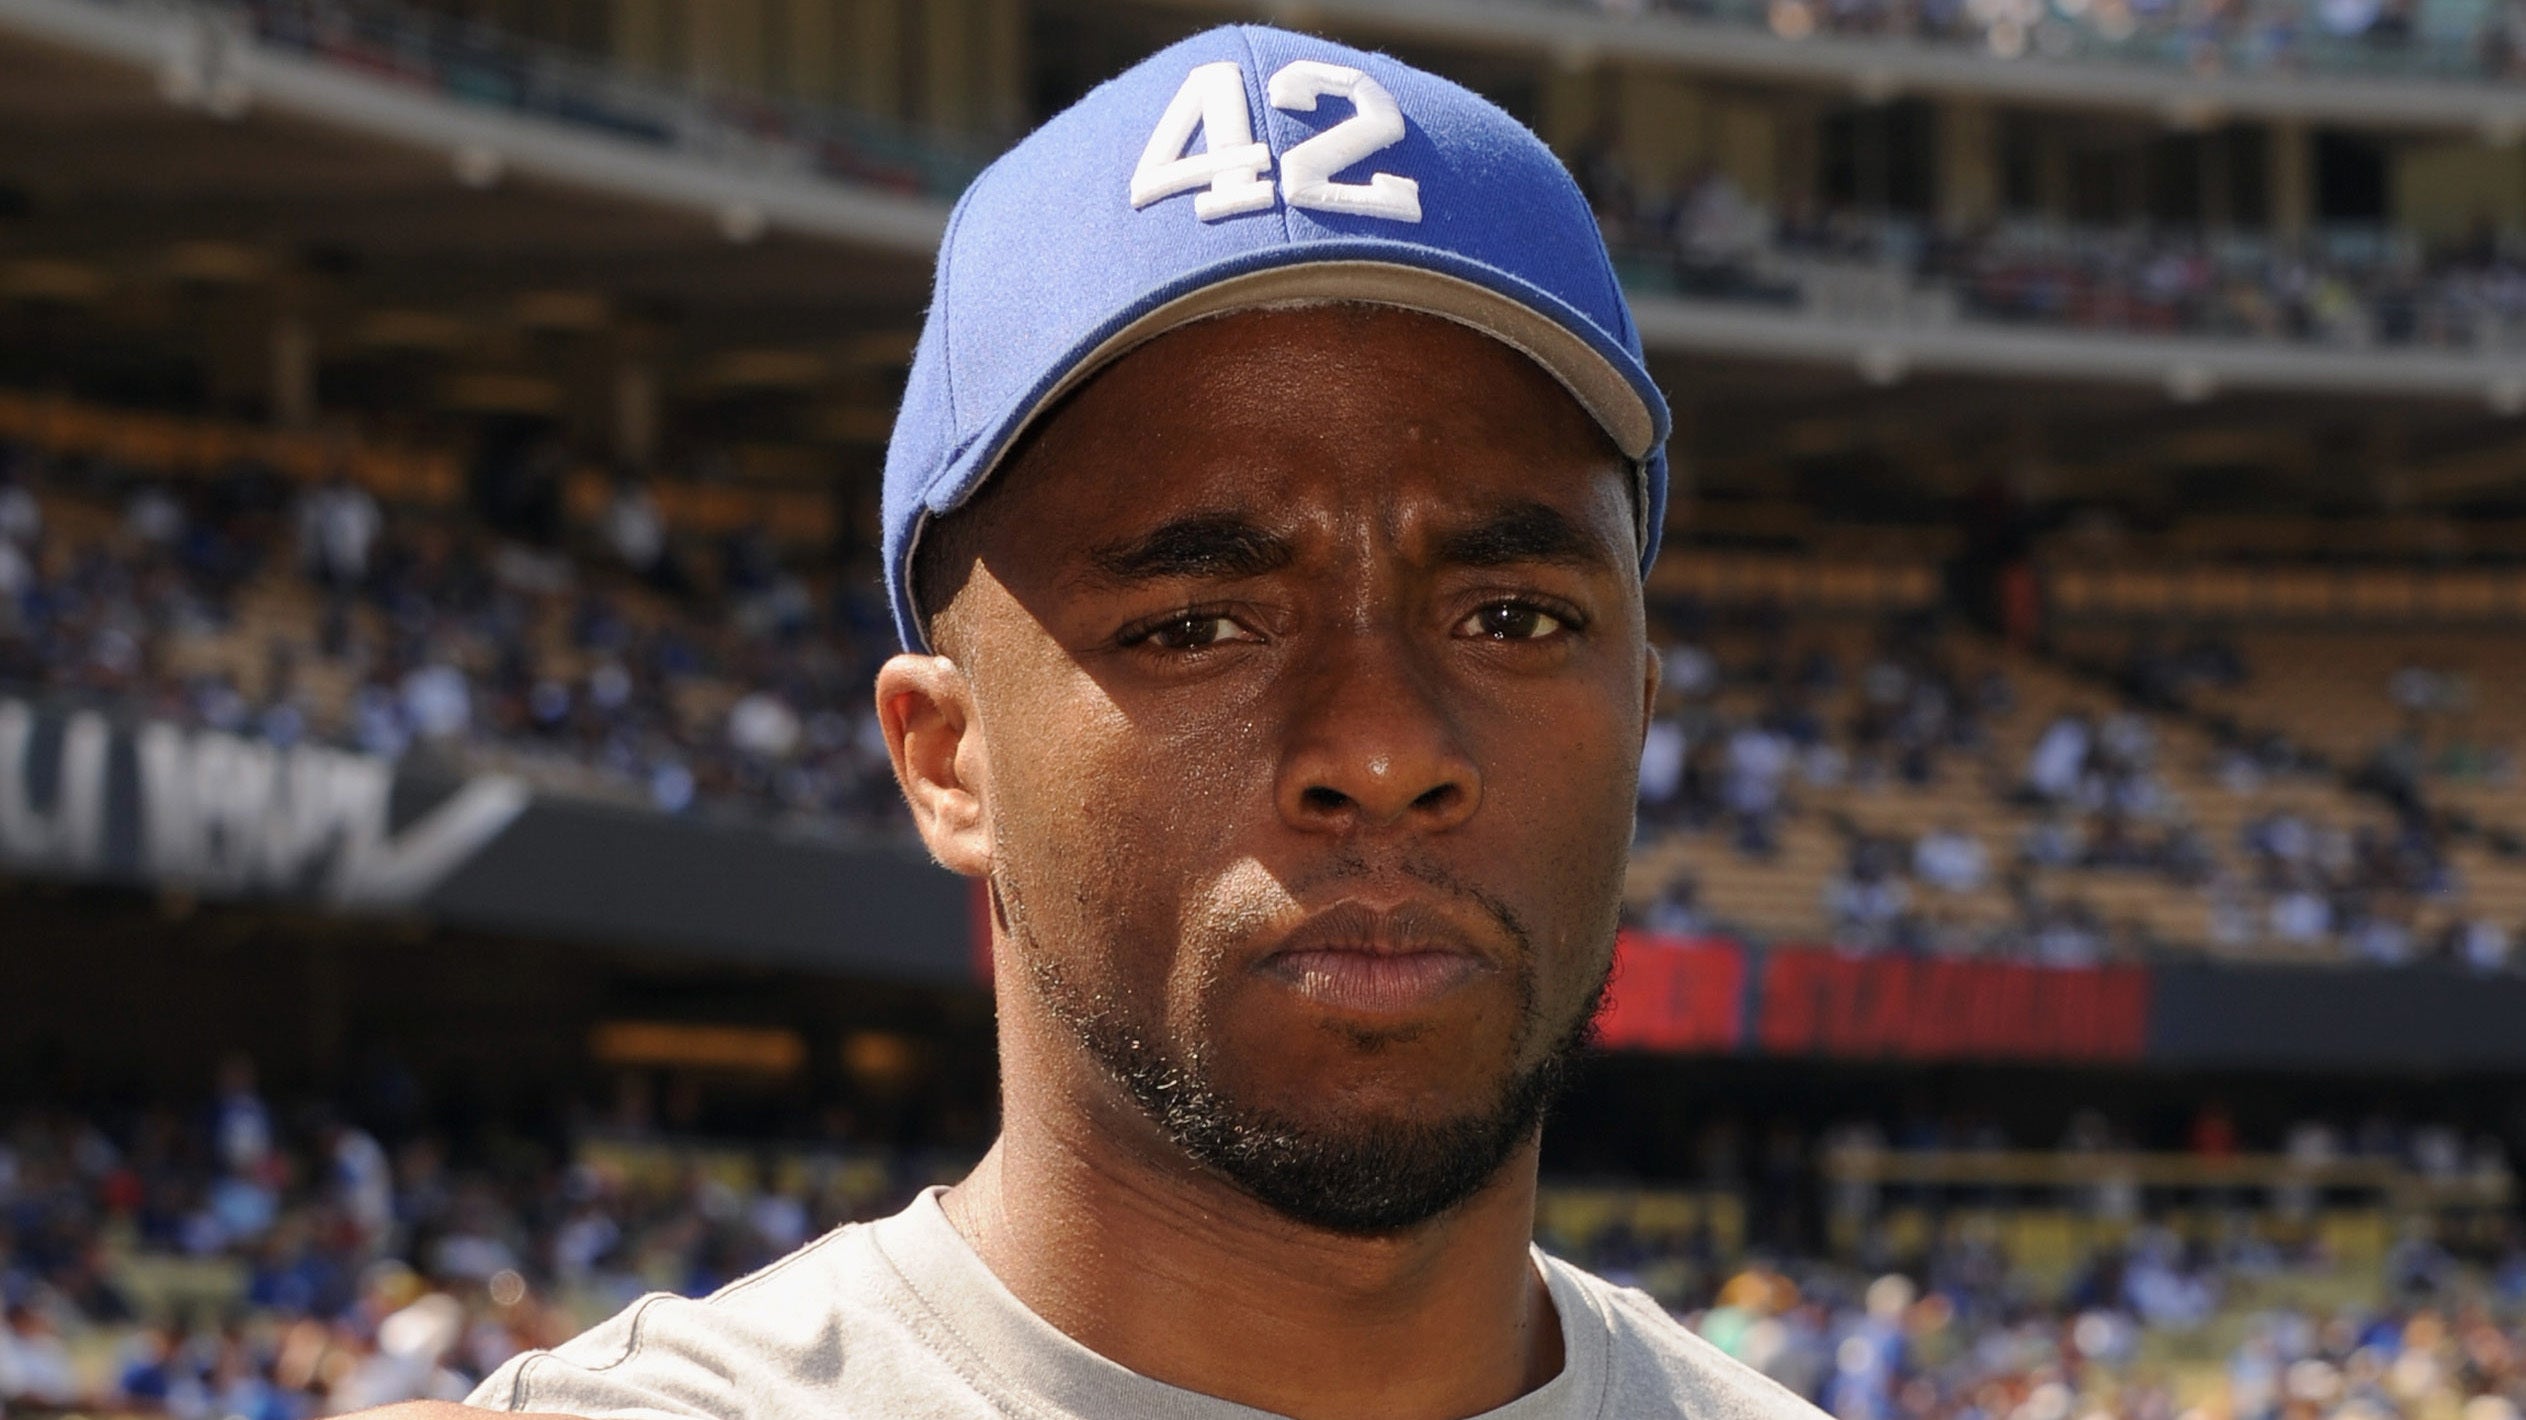 Betting On Baseball And 42 Prop Bets In Honor Of Jackie Robinson Day